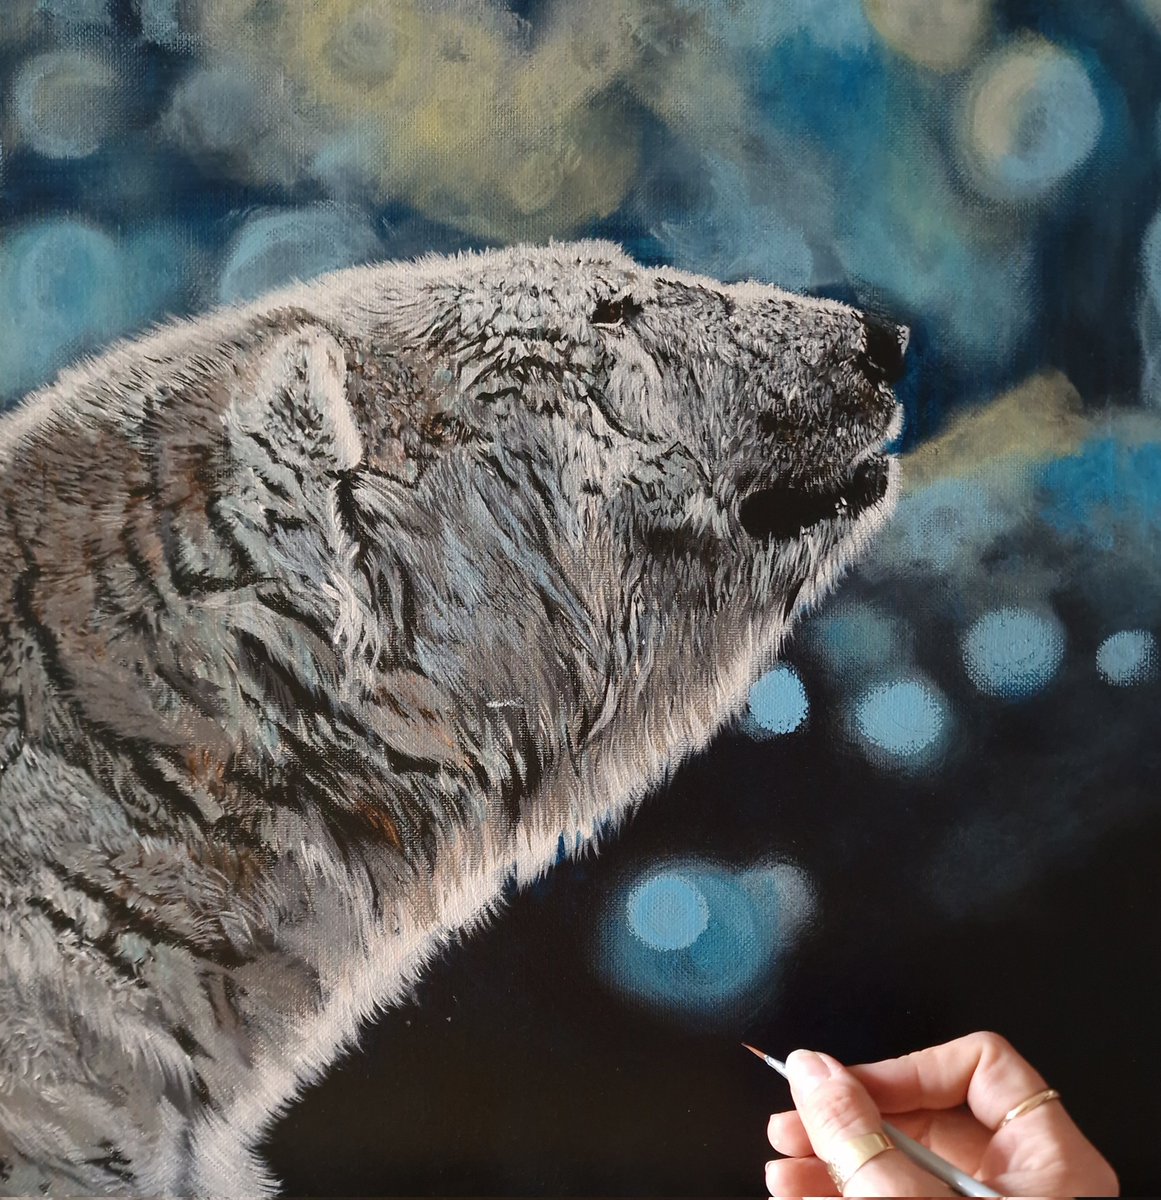 Work in progress...After whole Day of painting without break,  I've got based layers 😂 now can make top ones...acrylic on canvas wish you all beautiful weekend!
#acrylicpainting #acrylics #polarbearart #mypainting #wildlifepainting #wipart #wippainting